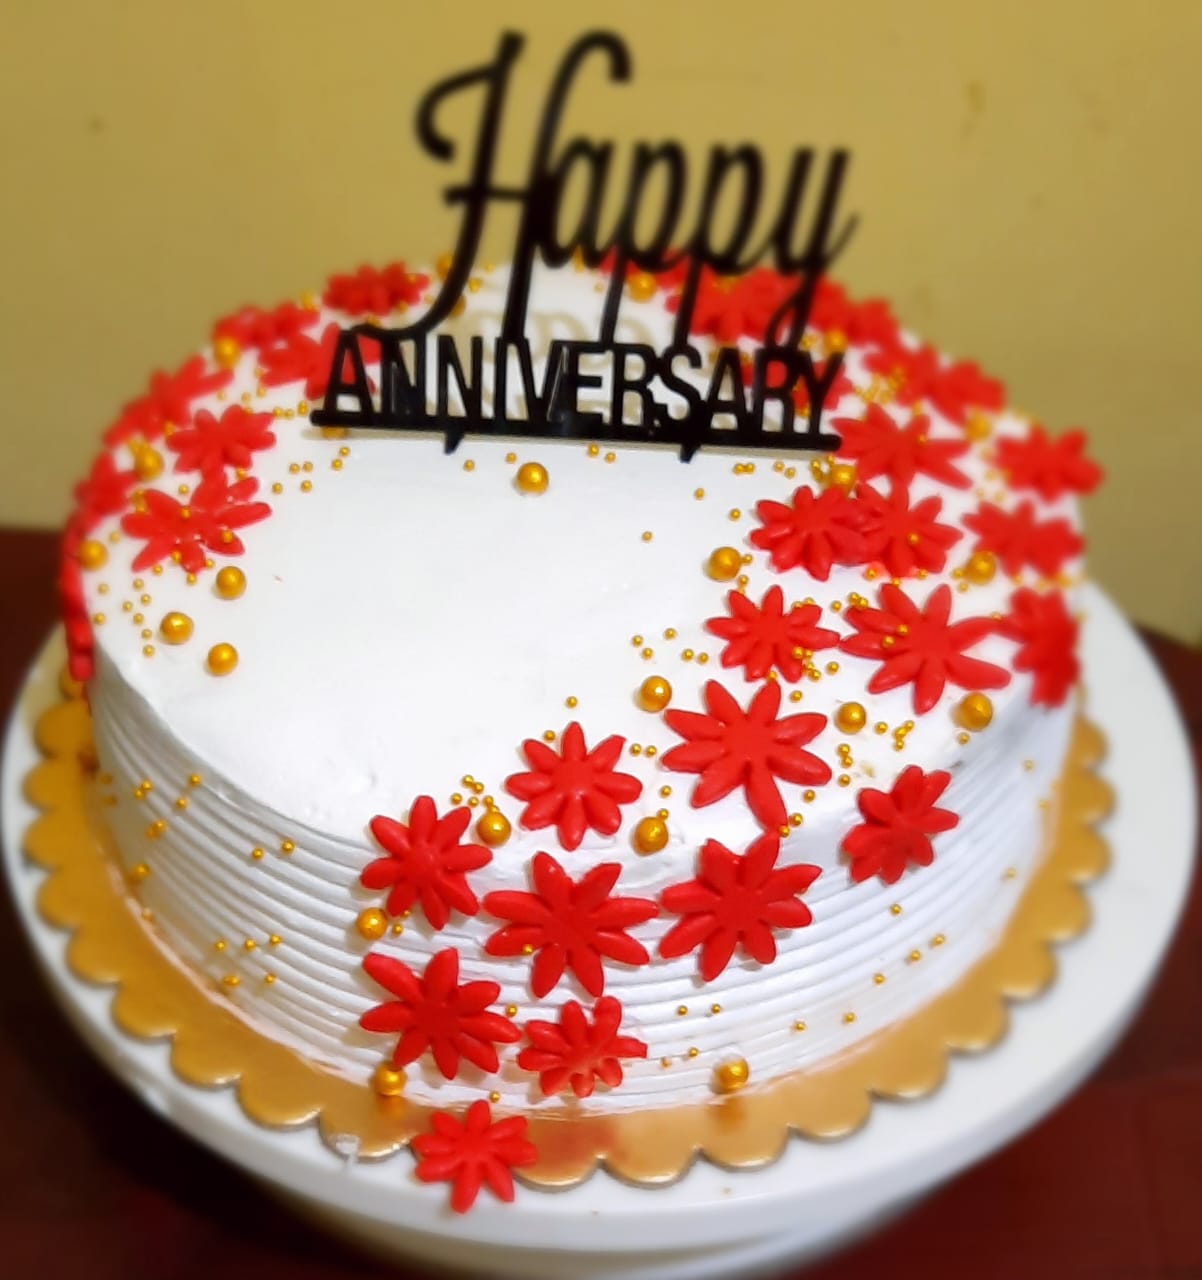 Online Anniversary Cake Delivery Shop in Guwahati